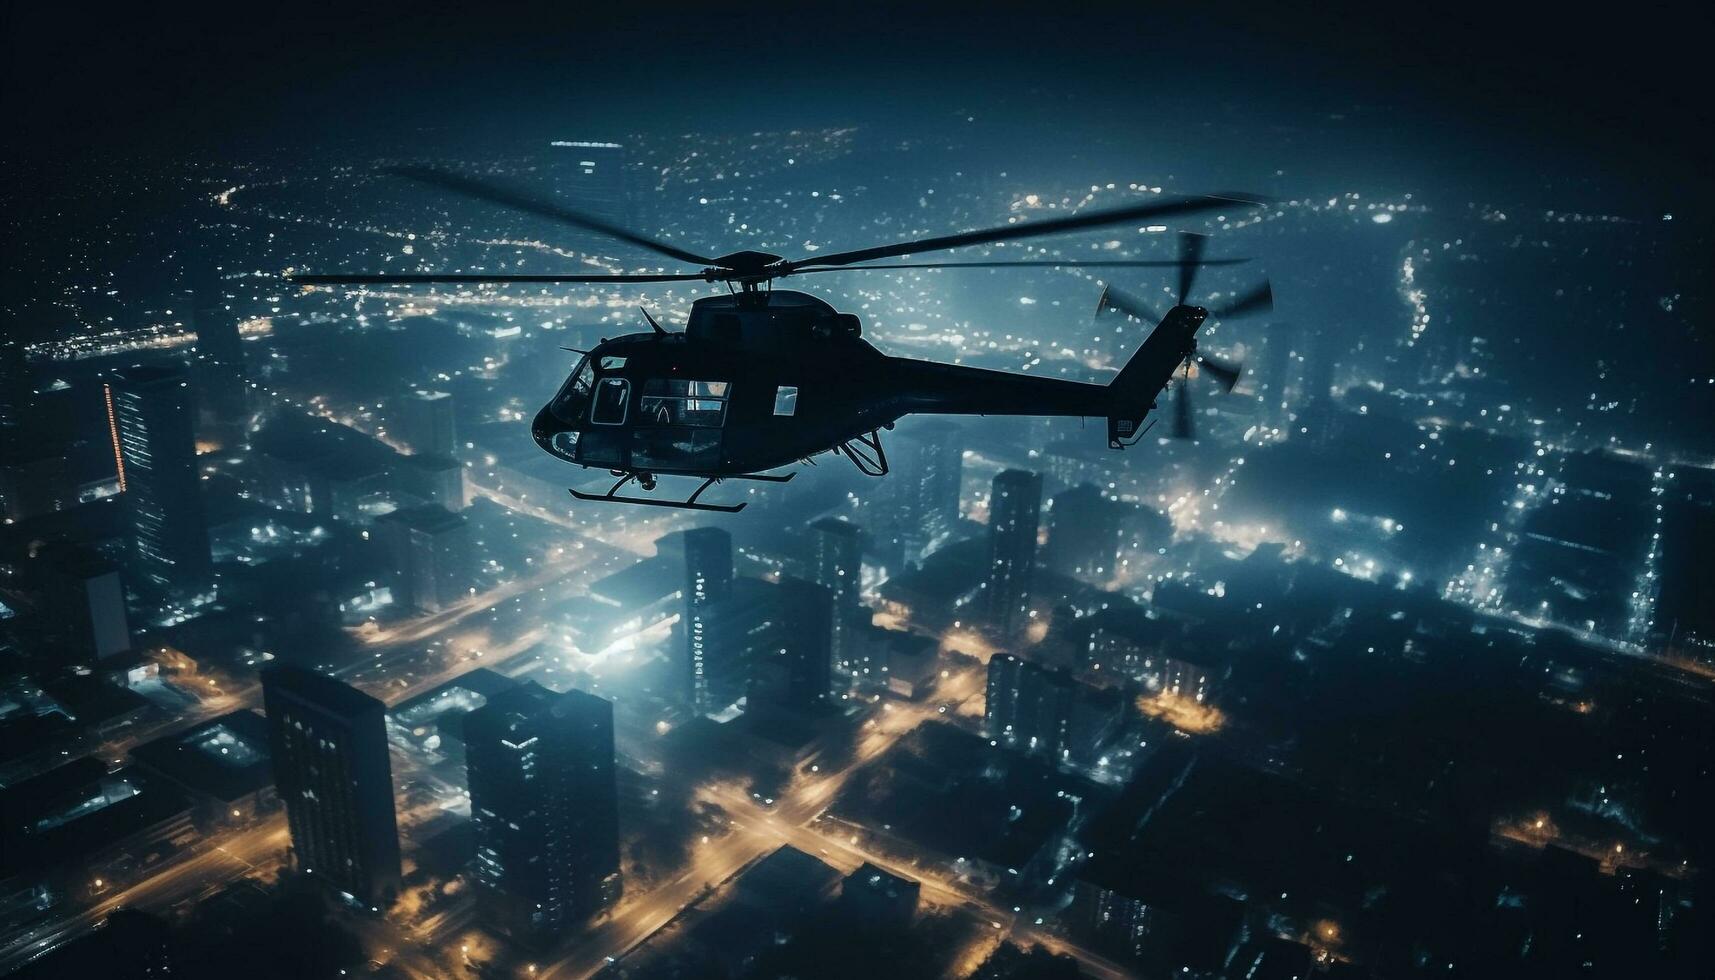 Glowing helicopter hovers mid air over city skyscrapers at dusk generated by AI photo